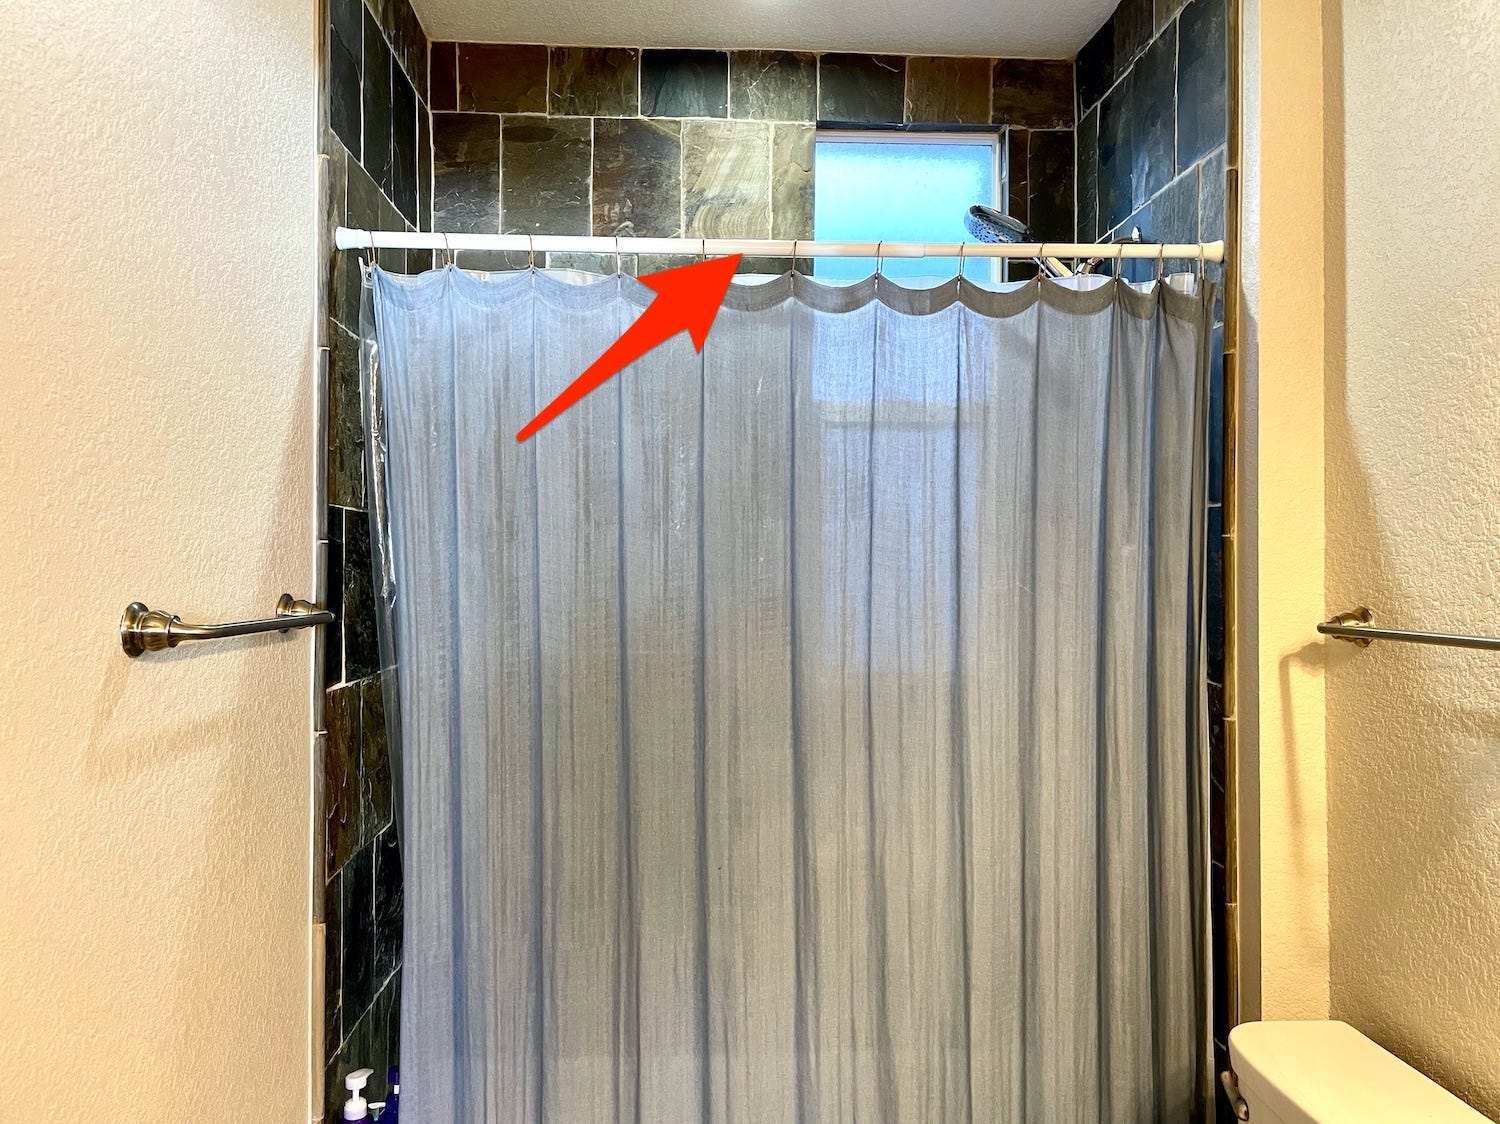 An arrow points to our current shower rod.